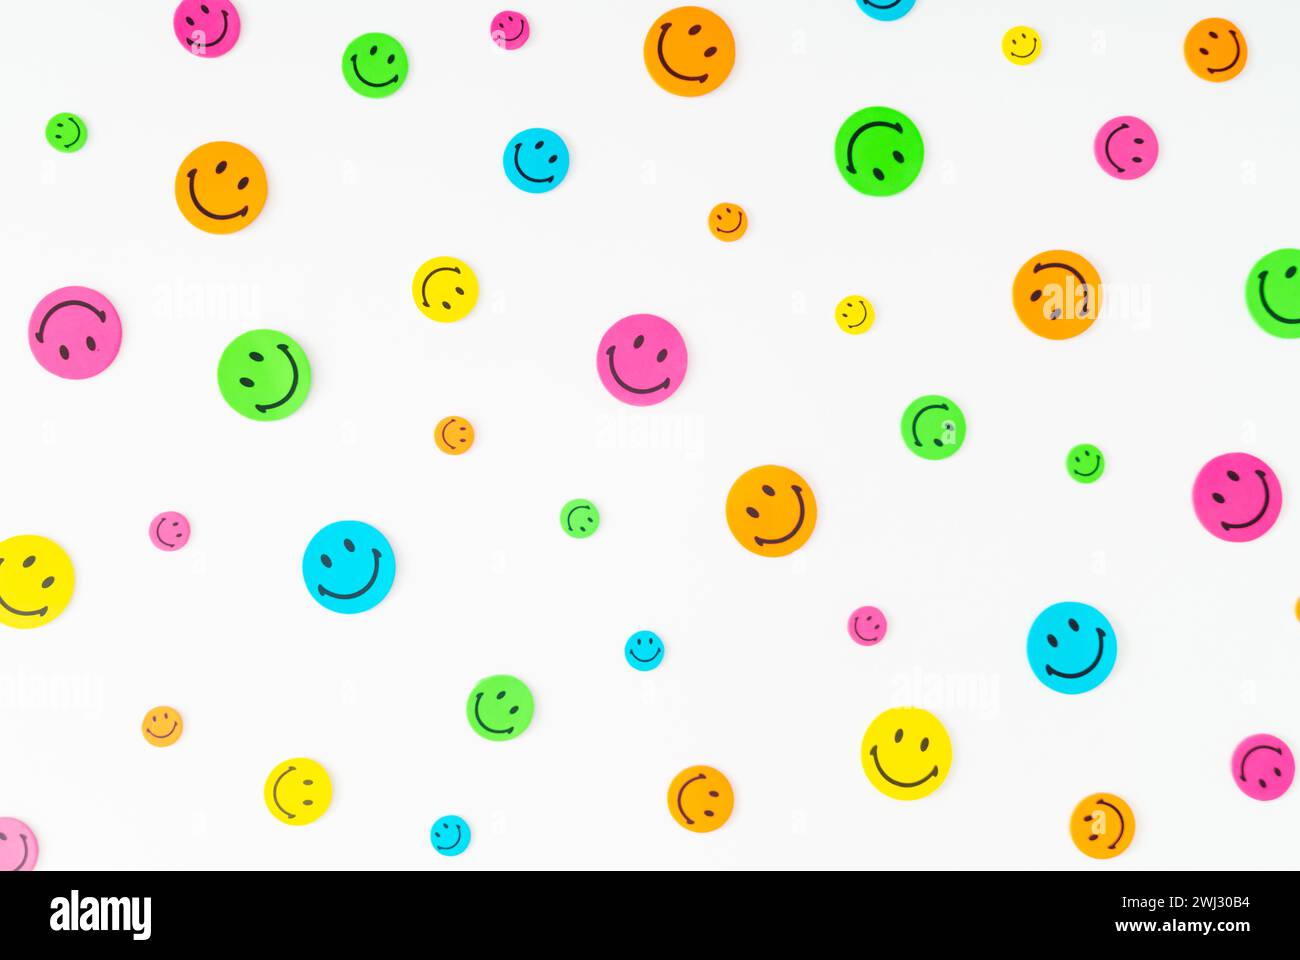 Colorful pattern composition made with smiley face stickers on white background. Minimal positive thinking and good mood concept. Stock Photo